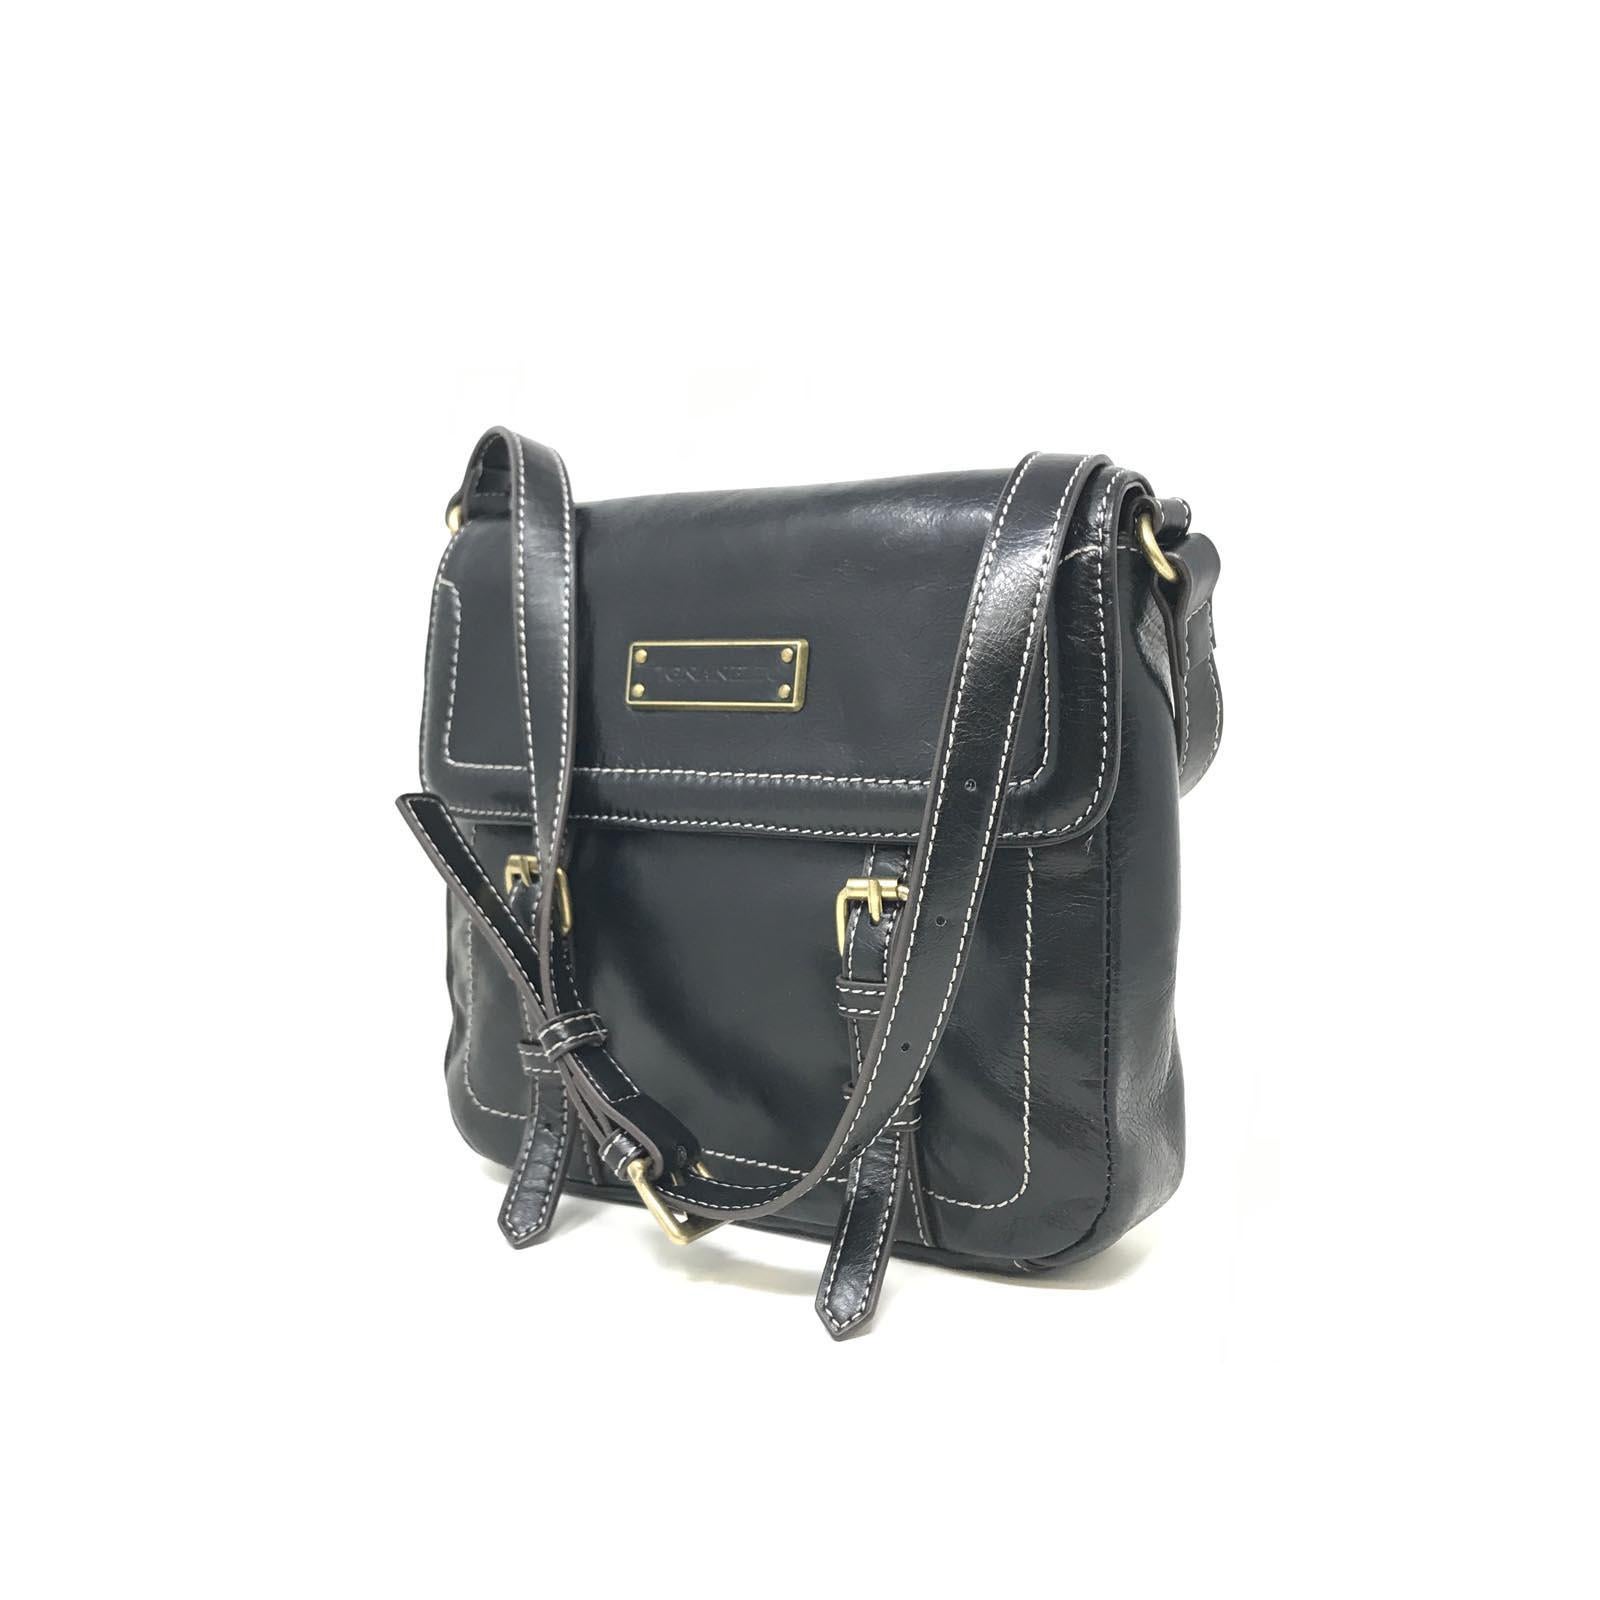 This 100% authentic Tignanello A269257 black distressed vintage leather flap crossbody bag is a new and does not come with box and papers. It's in excellent condition. 
Details:
Brand	Tignanello
Strap